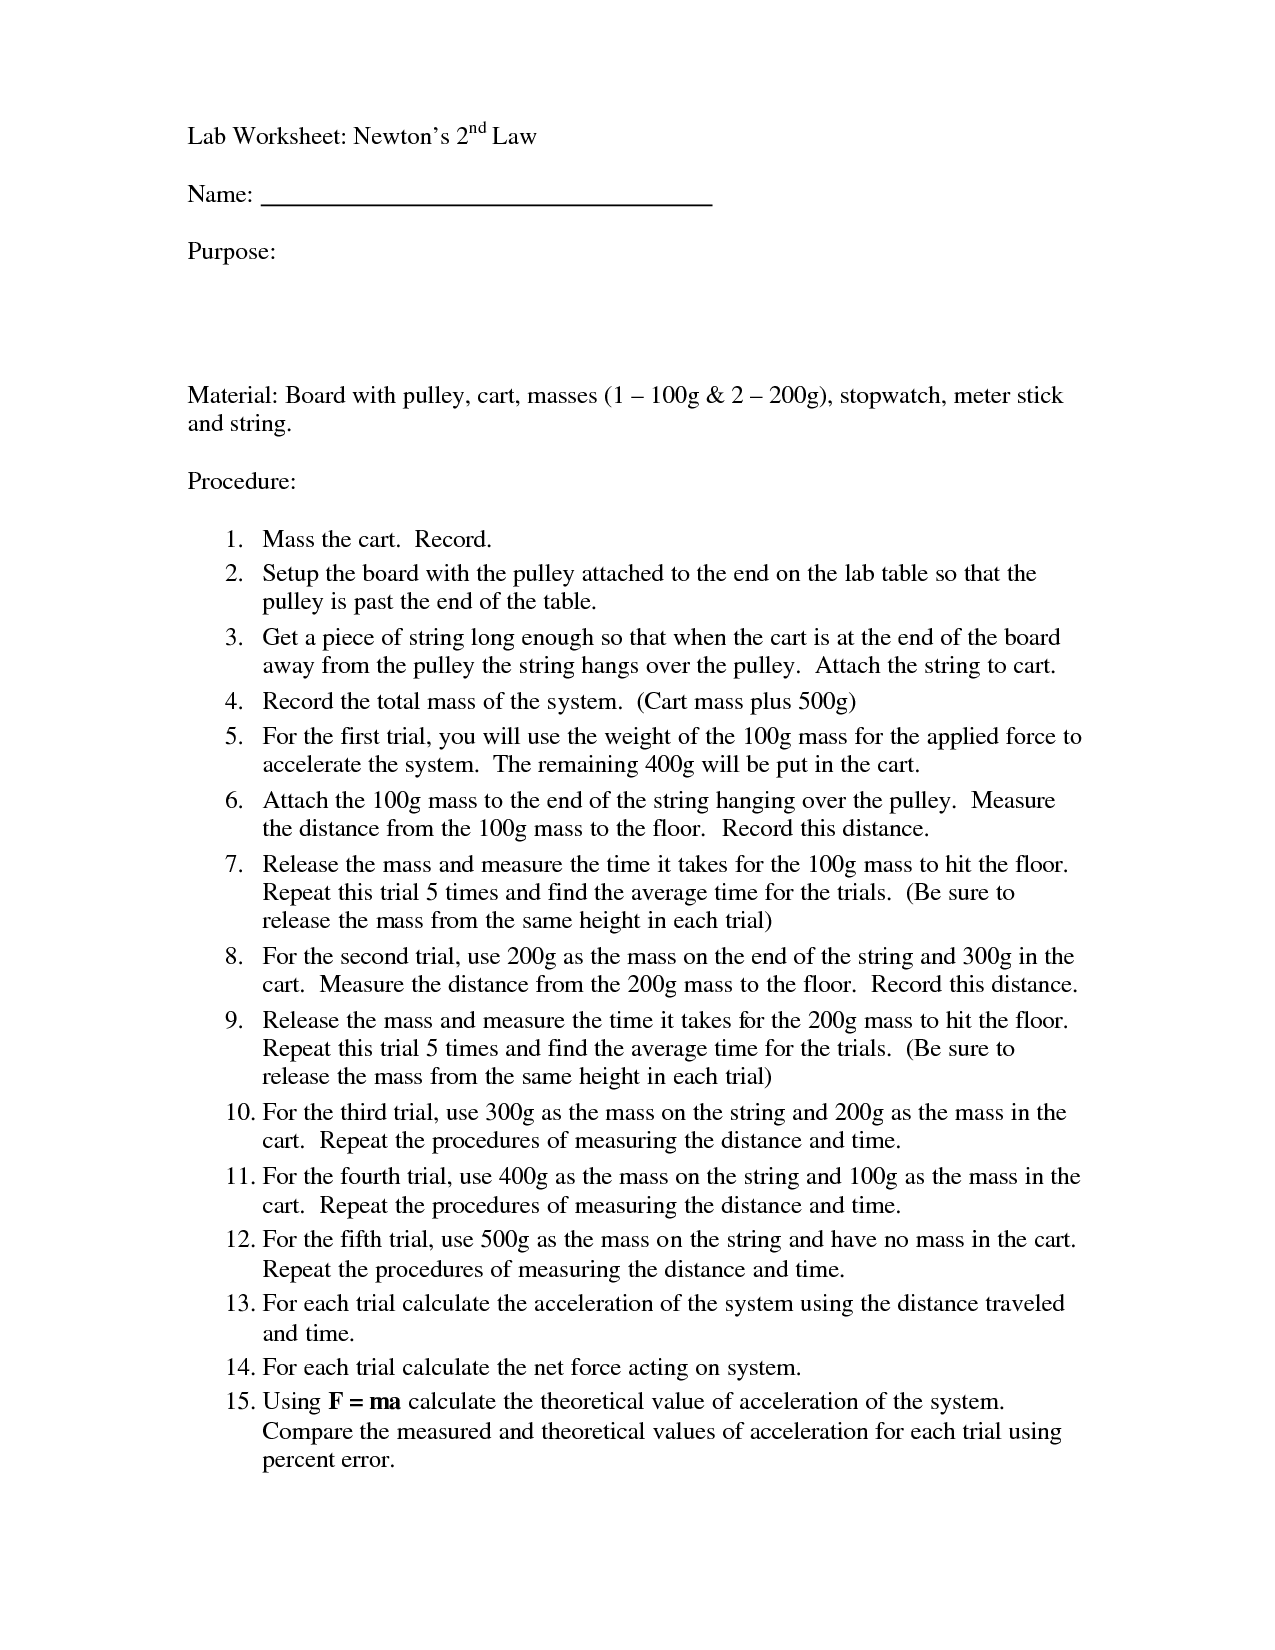 Newton's Second Law Worksheet Answers